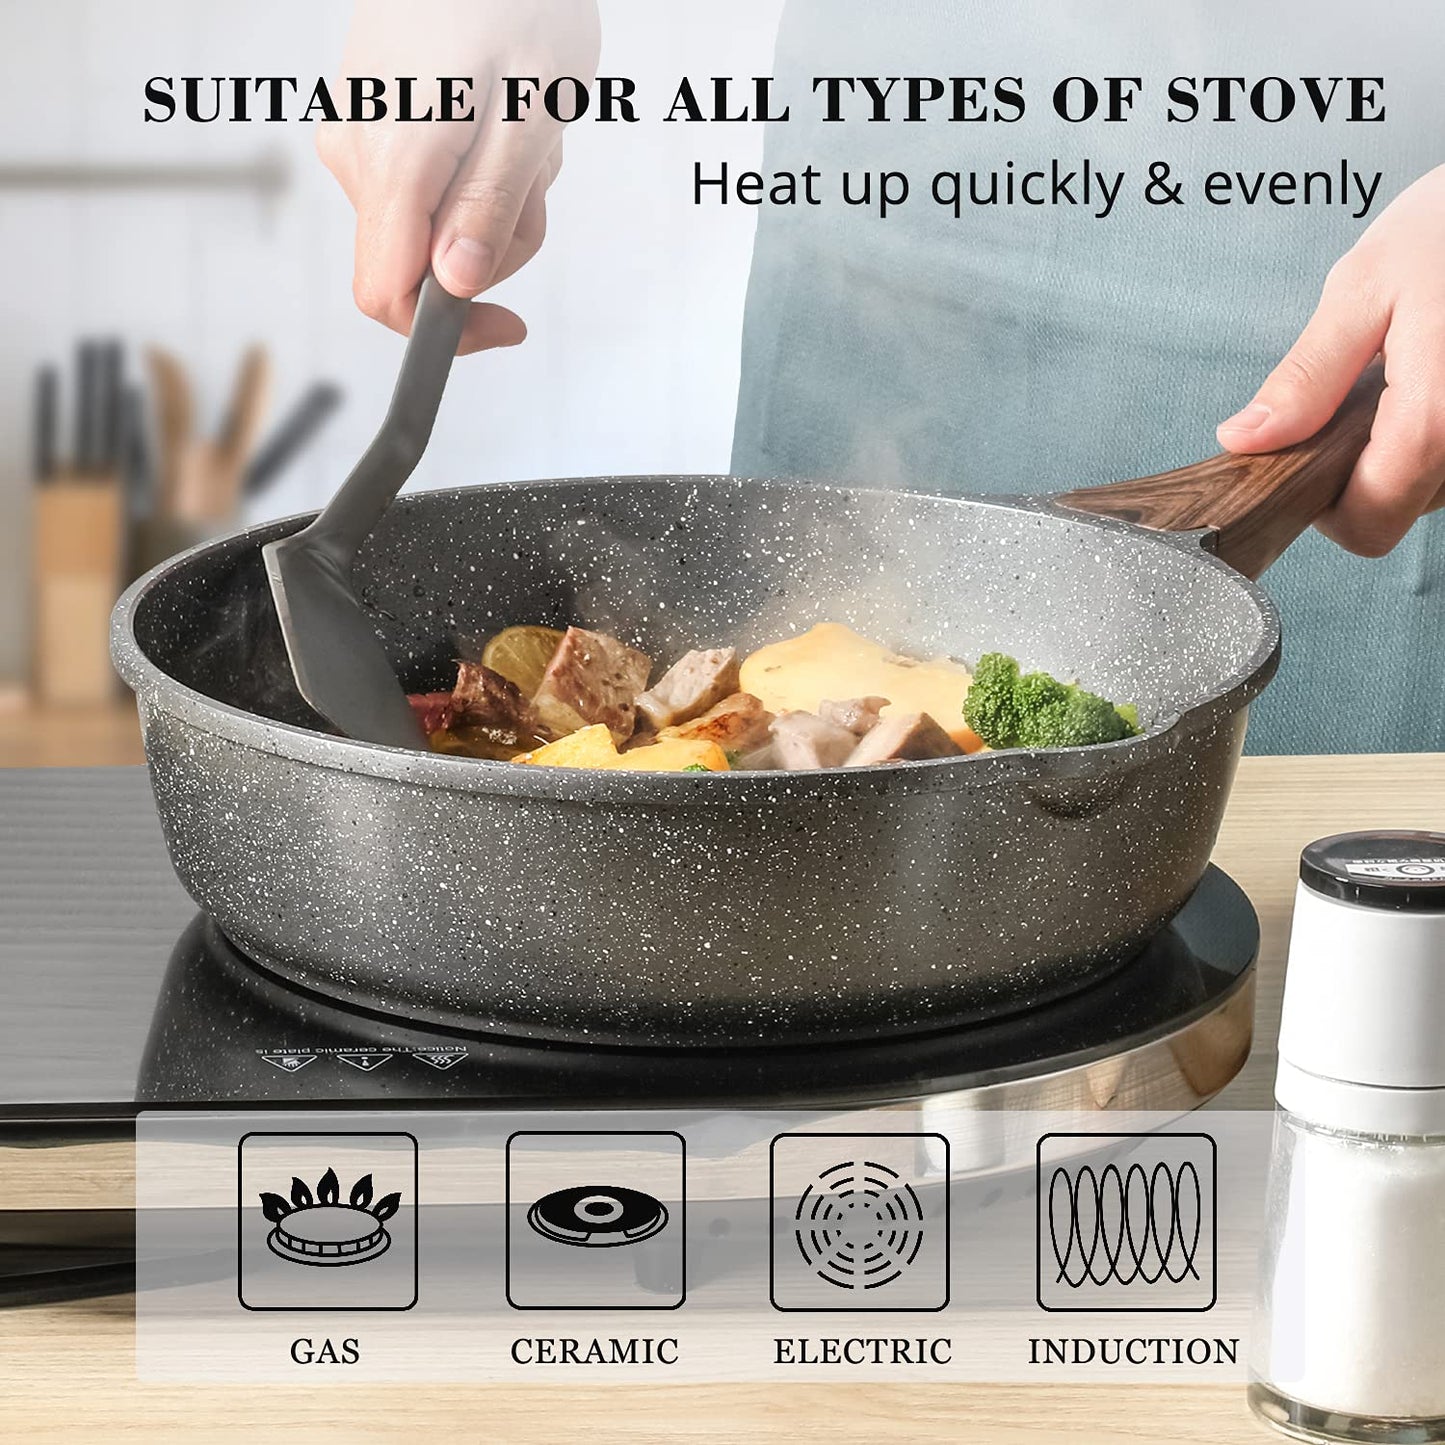 SENSARTE Nonstick Deep Frying Pan Skillet, 11-inch Saute Pan with Lid, Stay-cool Handle, Chef Pan Healthy Stone Cookware Cooking Pan, Induction Compatible, PFOA Free